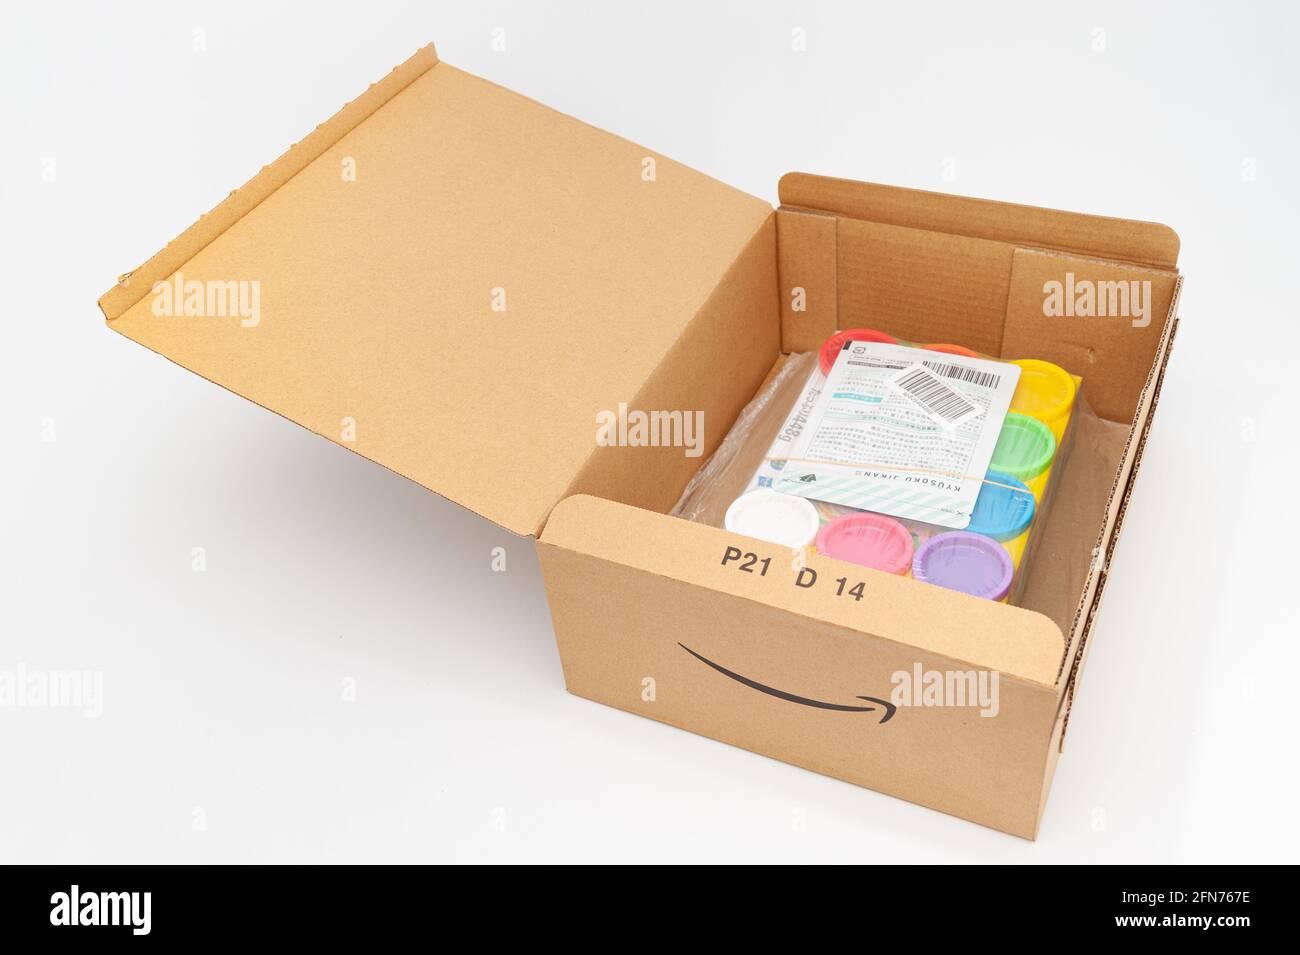 Amazon Box Open High Resolution Stock Photography and Images - Alamy